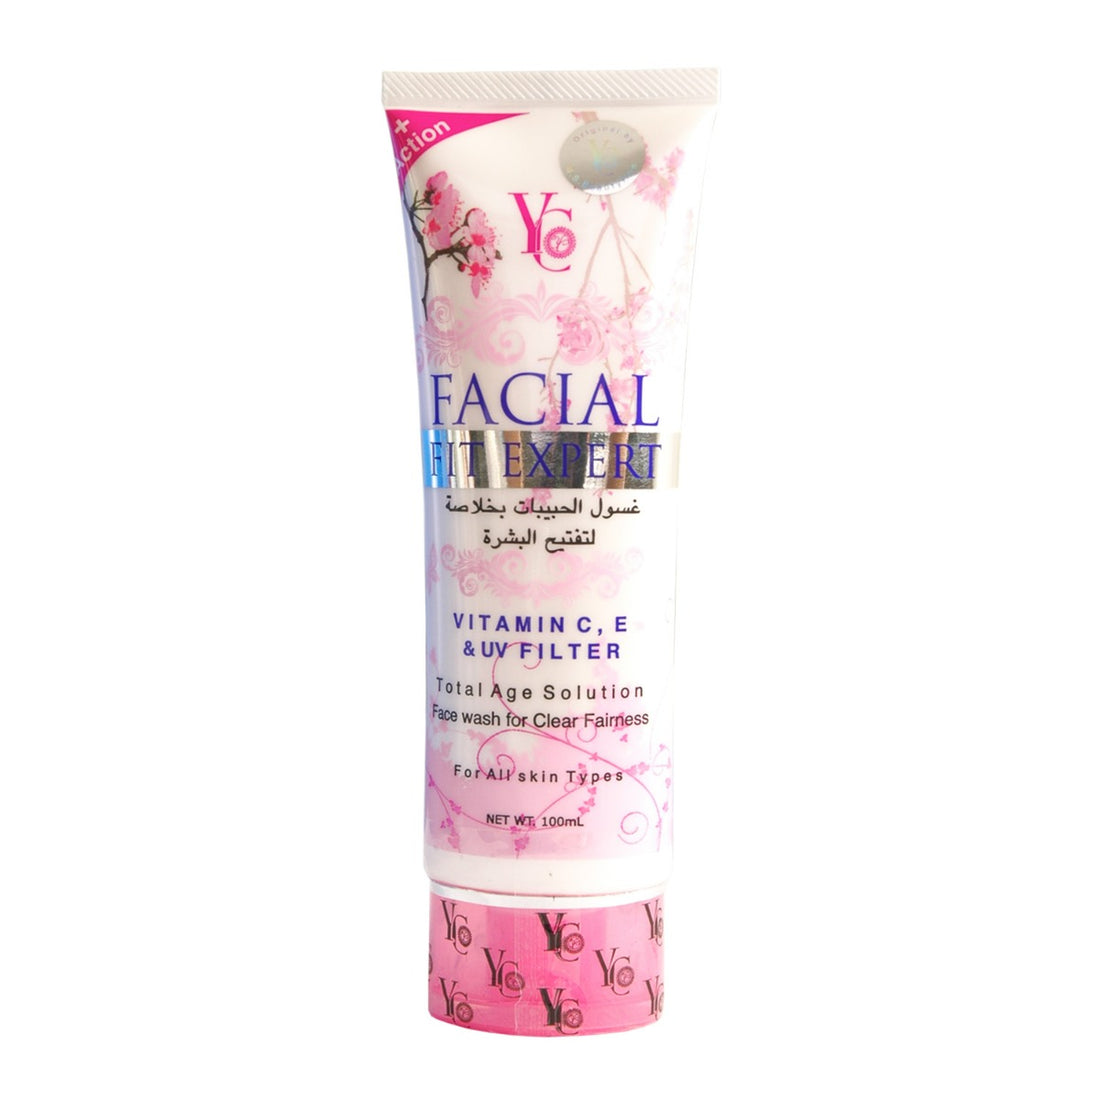 YC Facial Fit Expert Total Age Solution Face Wash Pink (100ml)